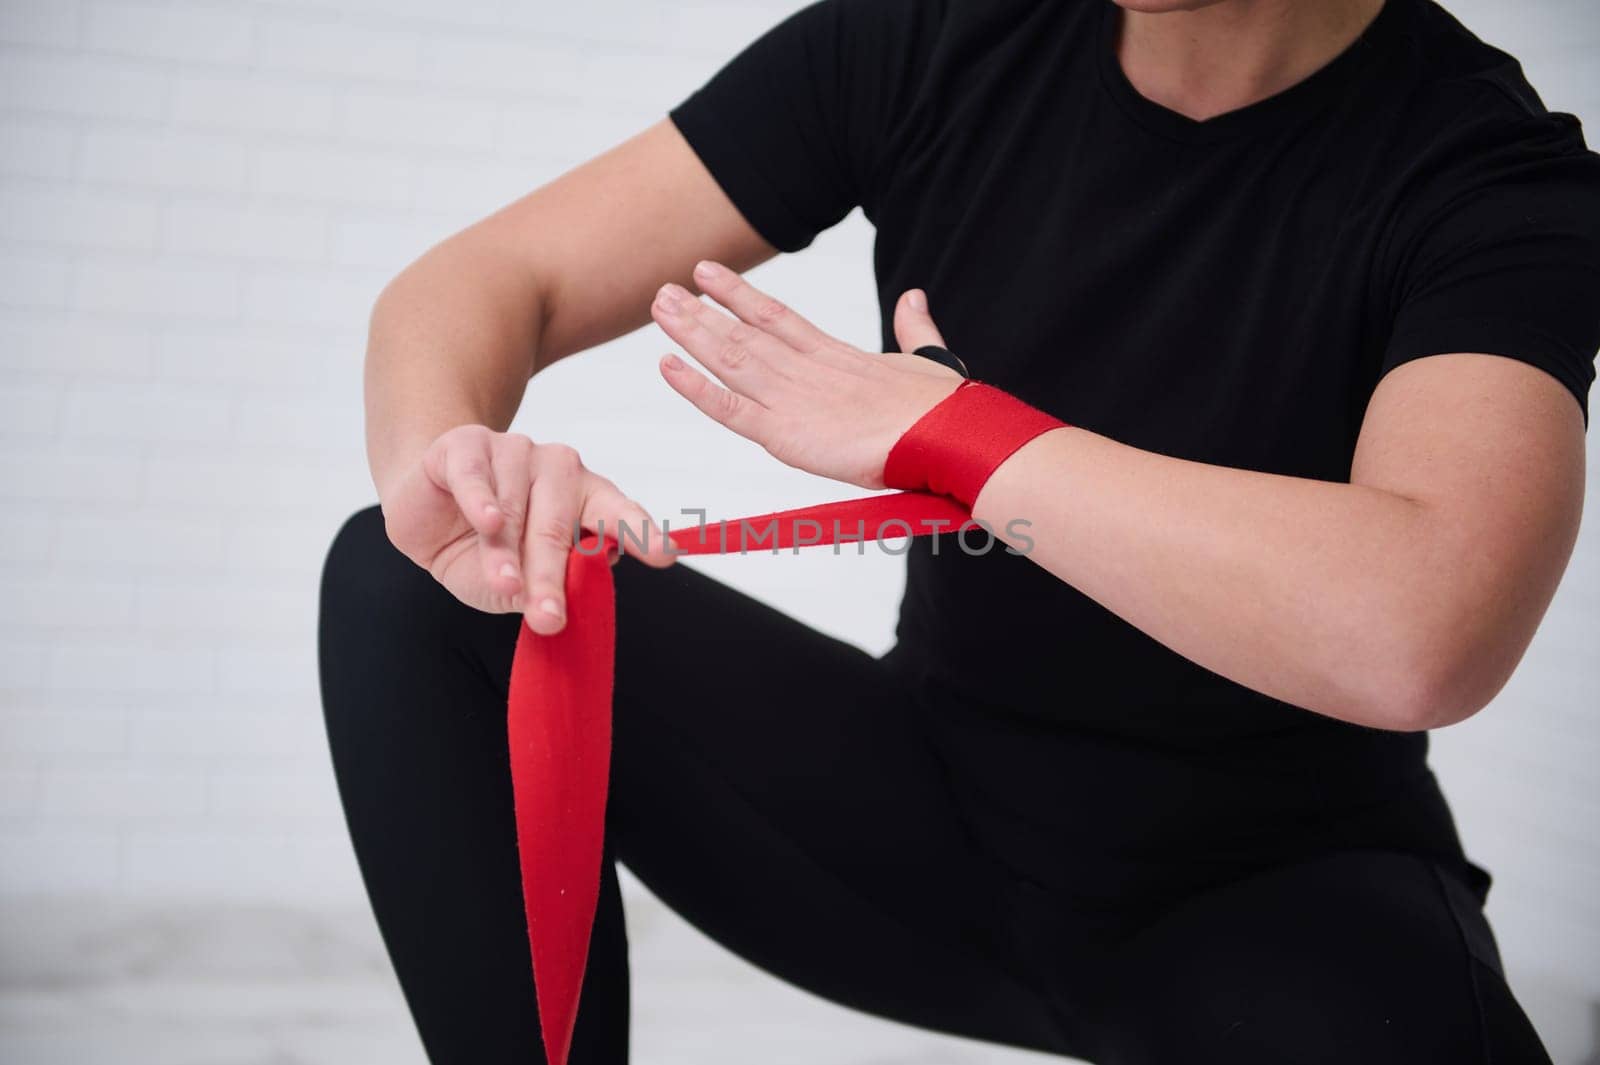 Close-up strong woman boxer fighter preparing boxing bandages, wrapping her wrist and hands with a red tape, before putting on boxing gloves, getting ready for training, isolated over white background